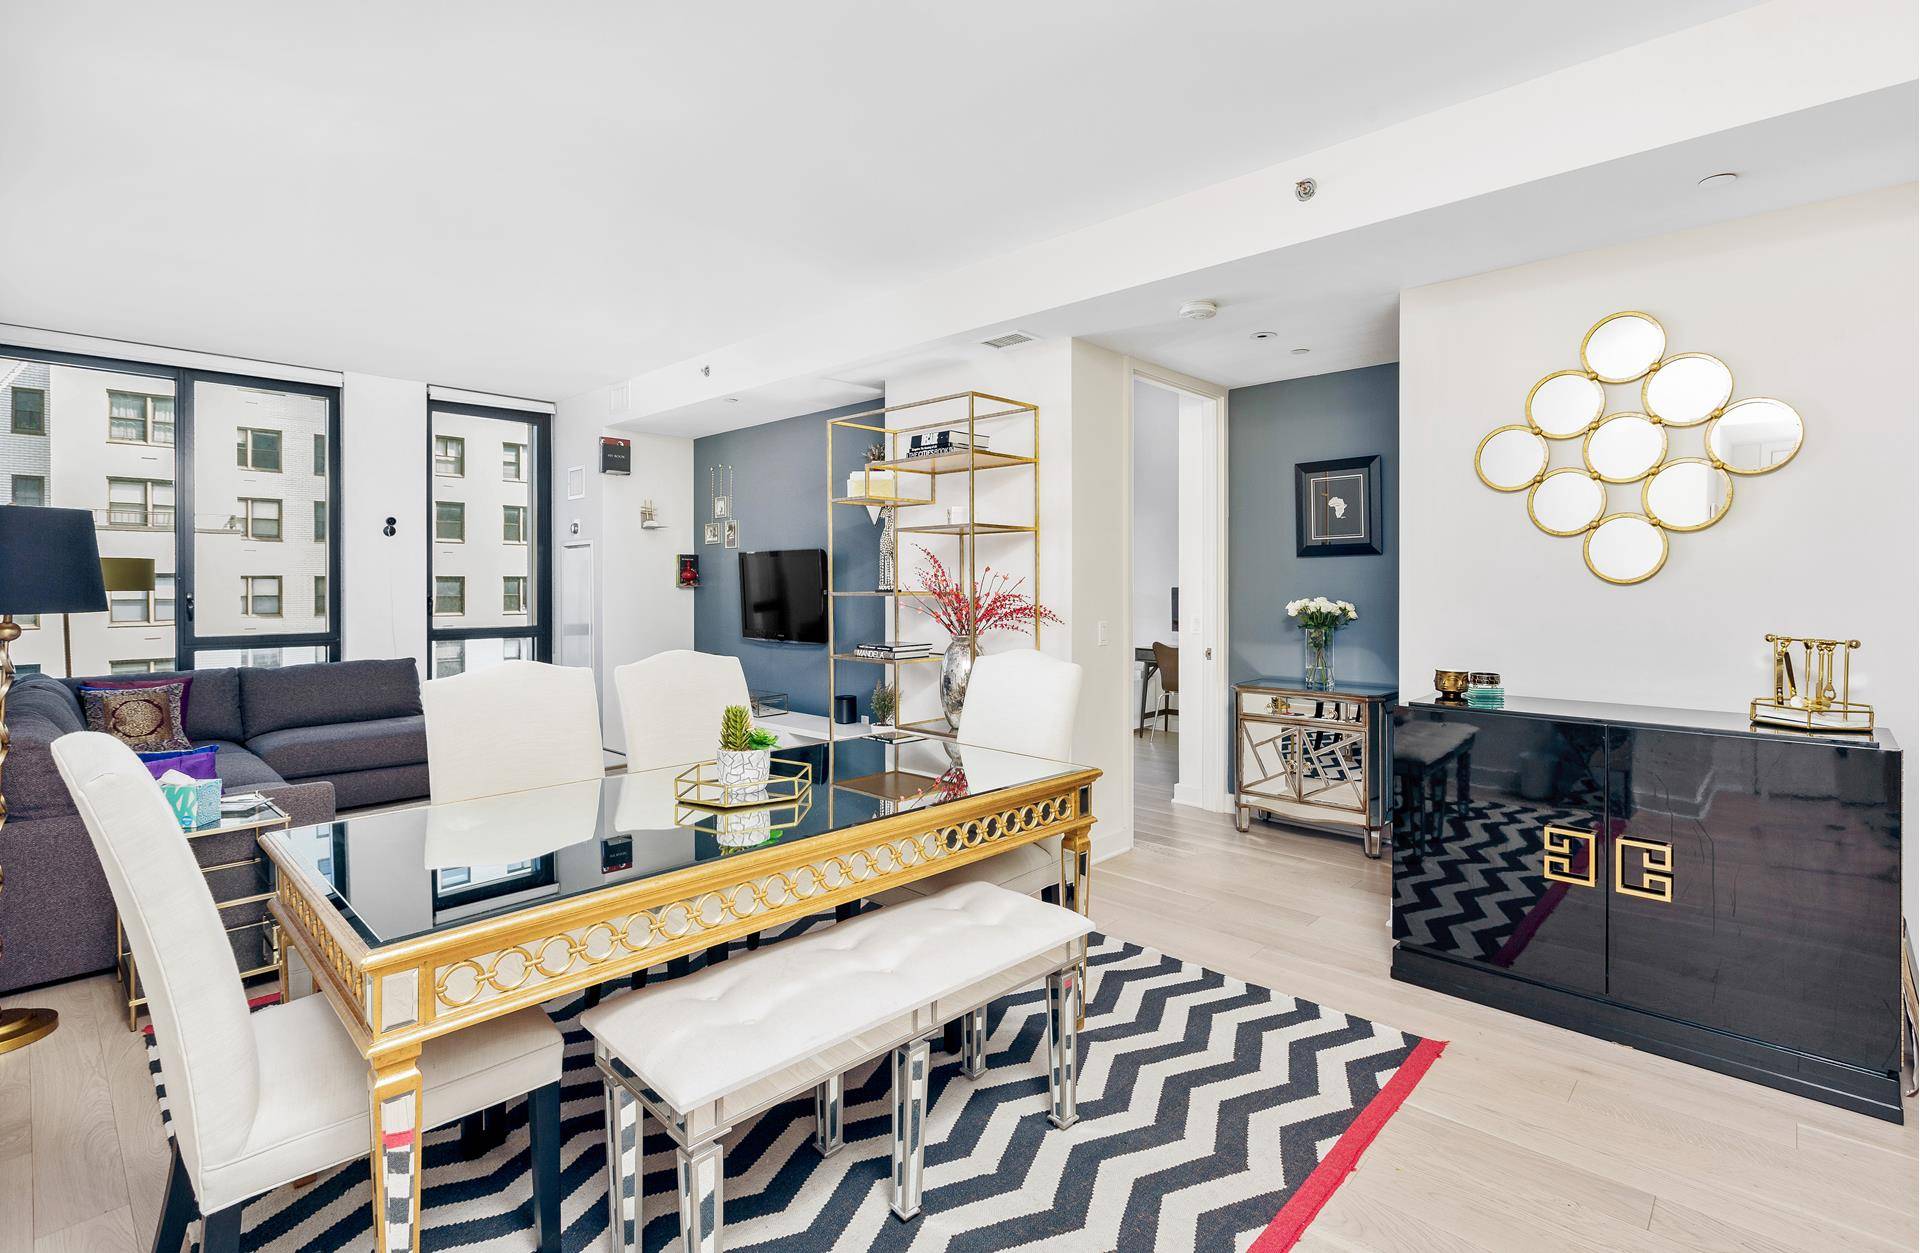 Located in the heart of Gramercy Park in a full service doorman building, this sophisticated one bedroom, one bathroom residence offers luxurious contemporary living.